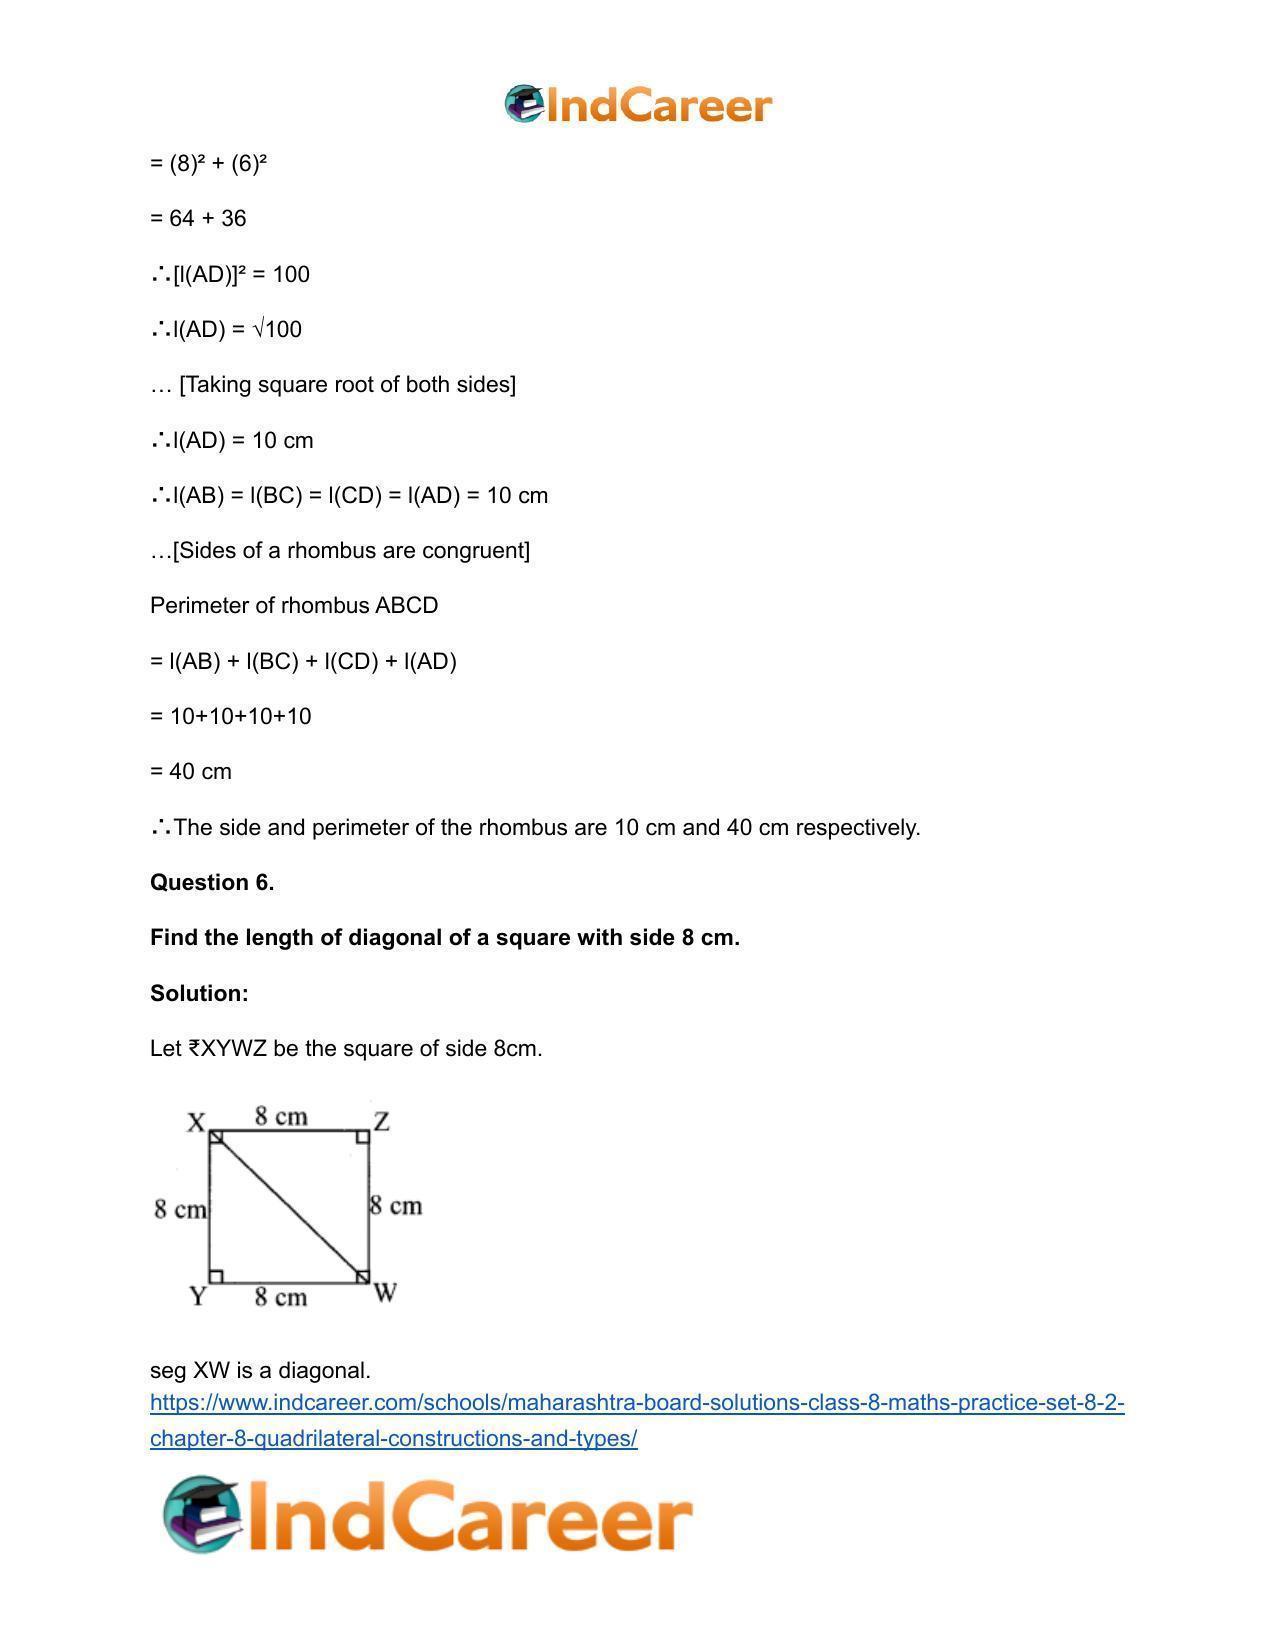 Maharashtra Board Solutions Class 8-Maths (Practice Set 8.2): Chapter 8- Quadrilateral: Constructions and Types - Page 8